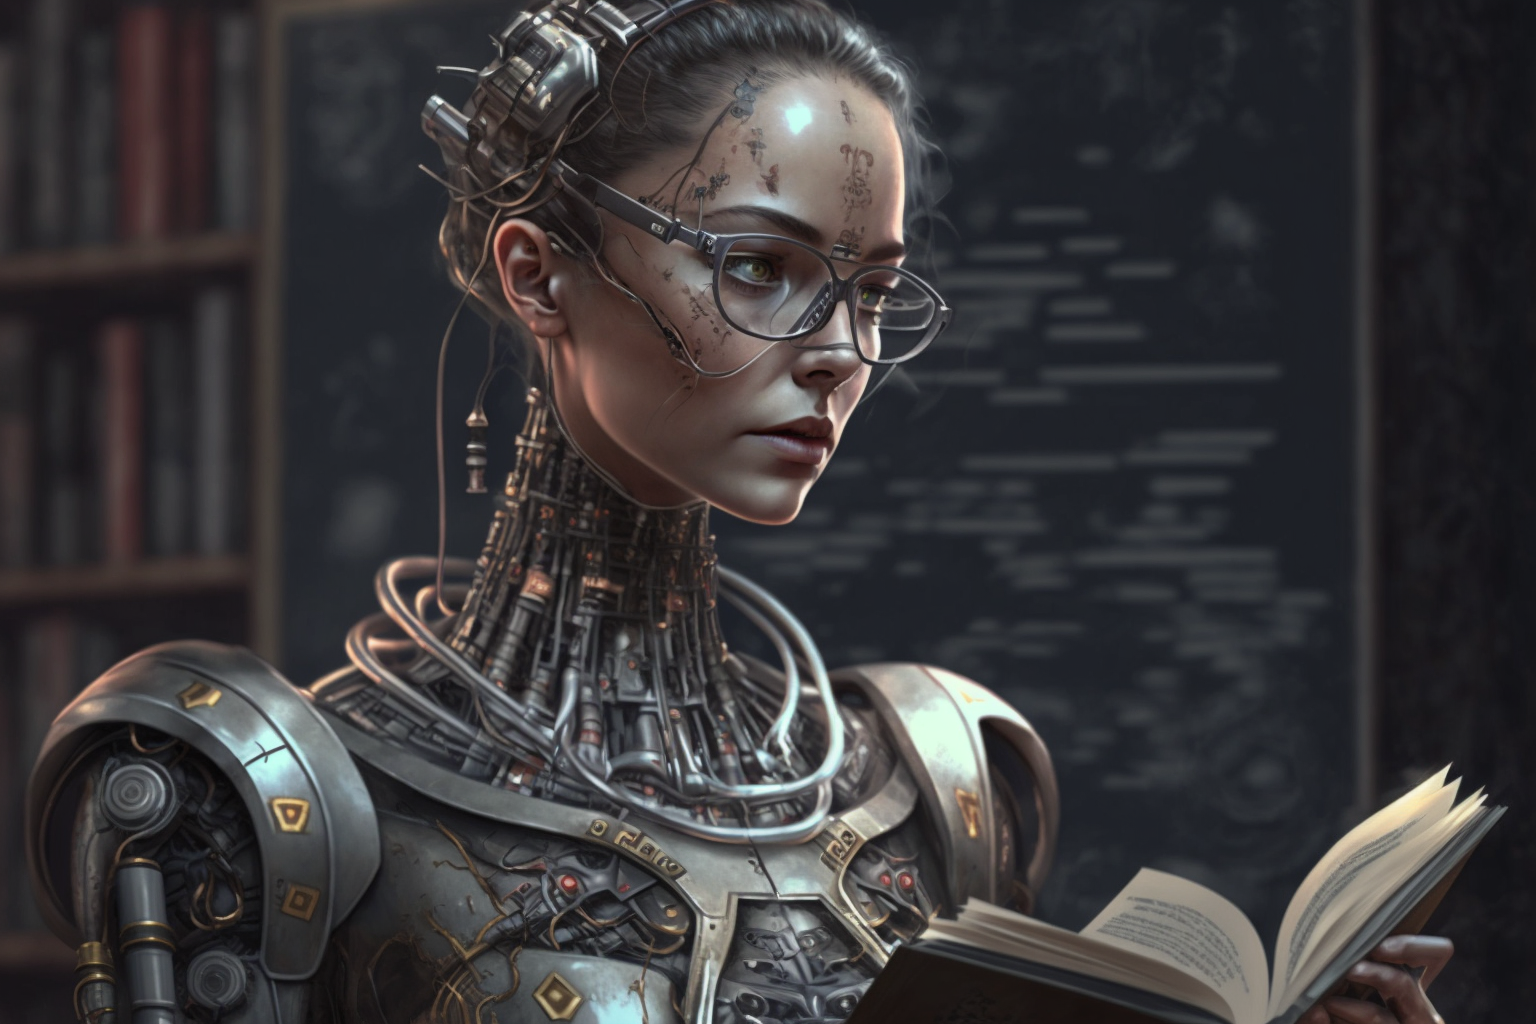 A robot with the face of a young woman holds a book in a library